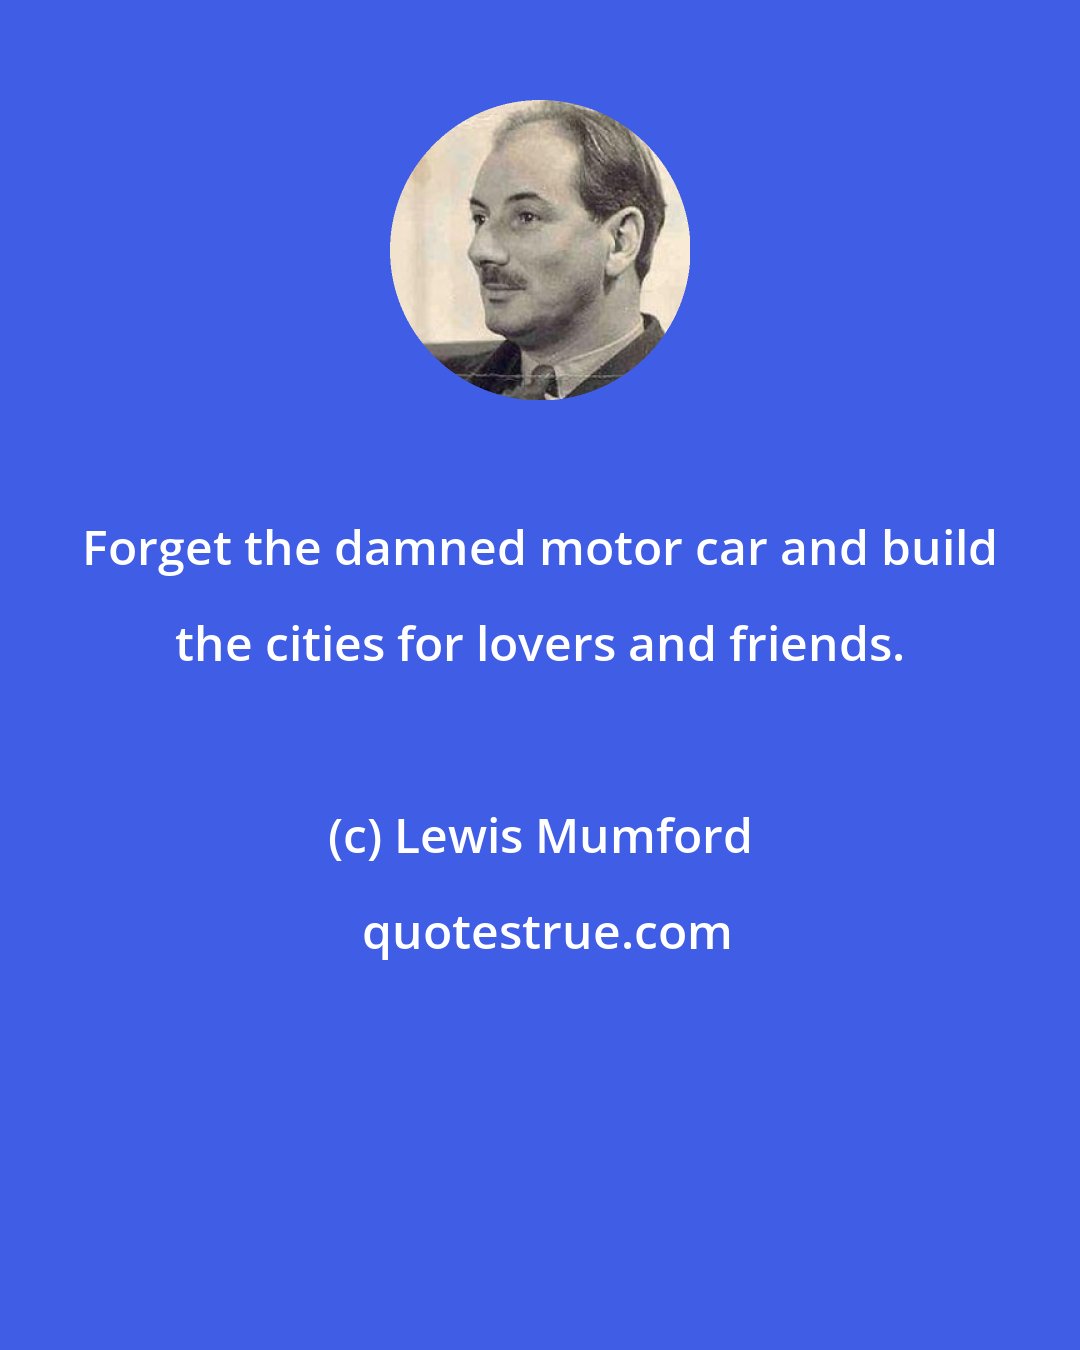 Lewis Mumford: Forget the damned motor car and build the cities for lovers and friends.